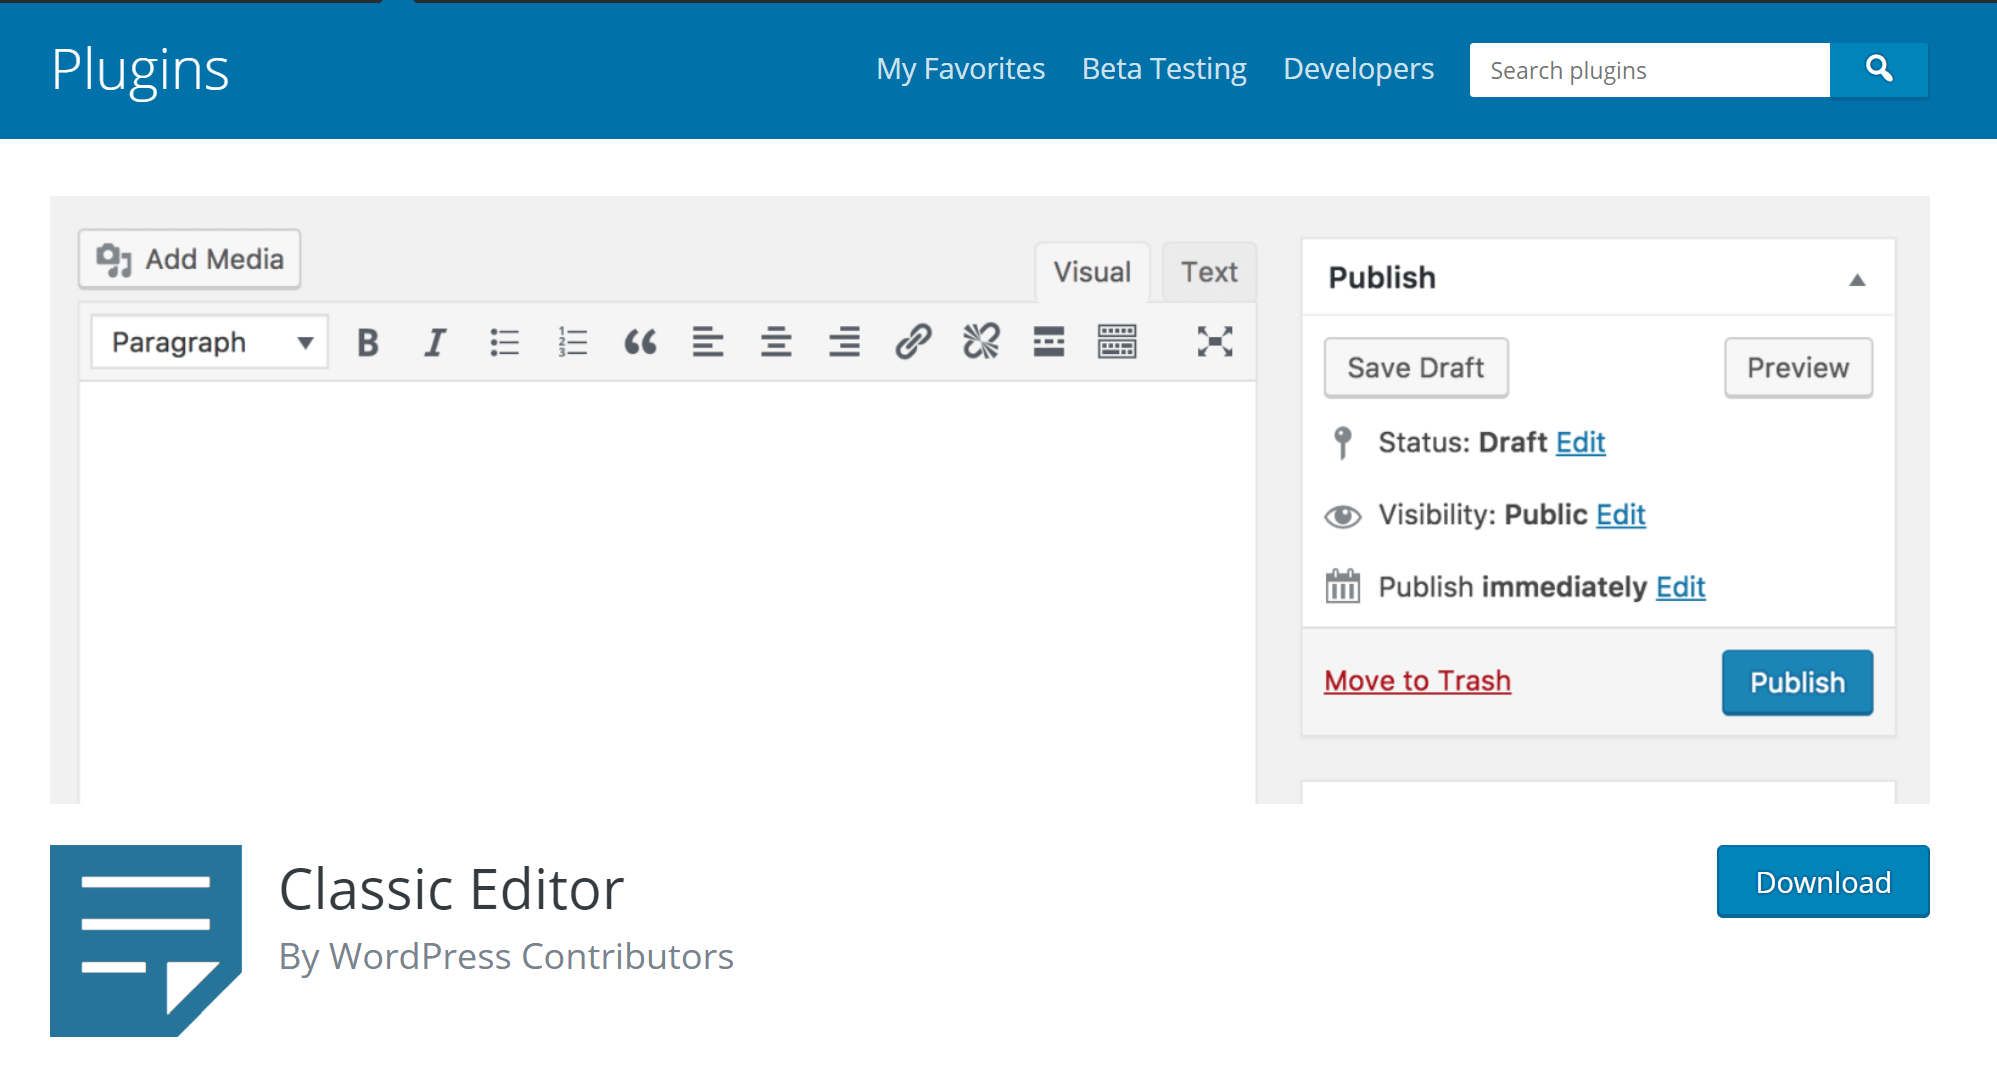 Screen shot of the Classic Editor plug-in page.